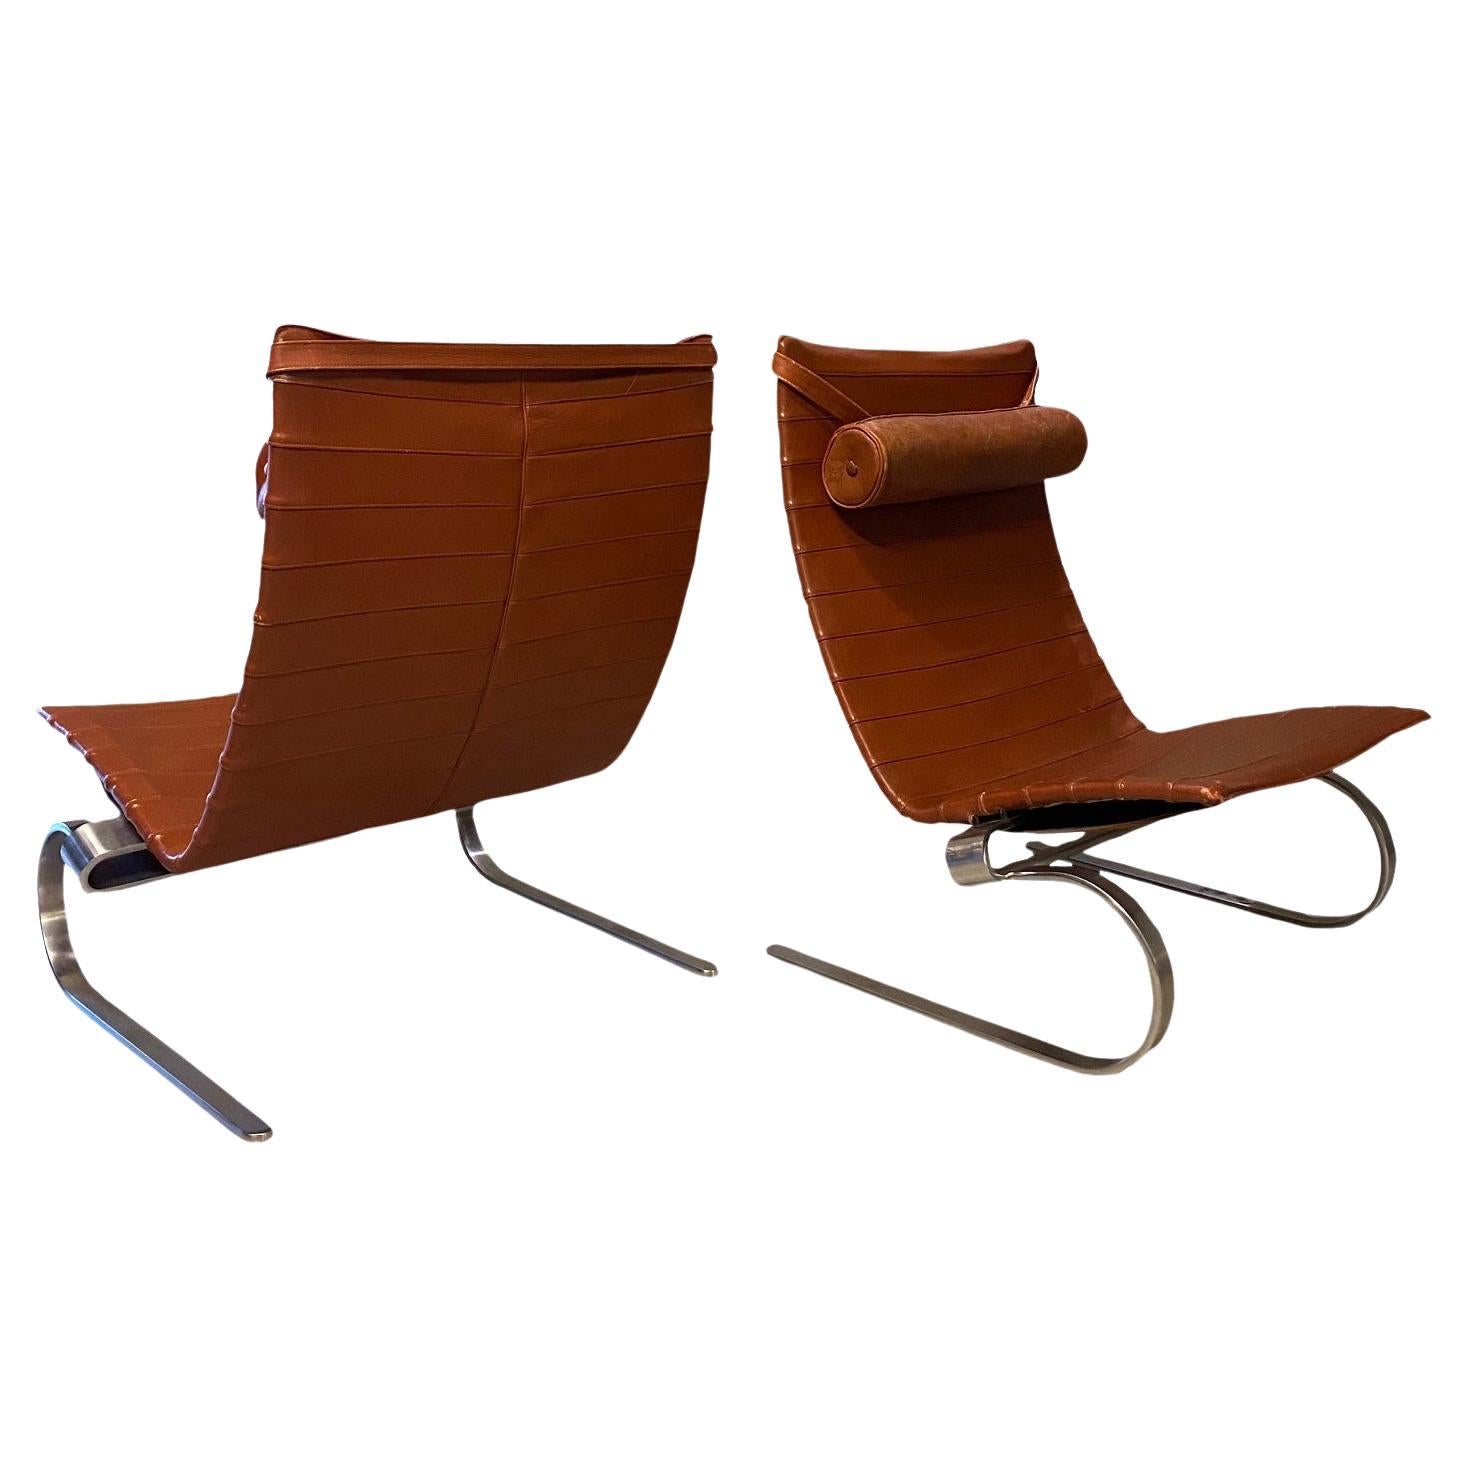 Pair of PK20 Lounge Chairs by Poul Kjærholm, Denmark, 1980's For Sale